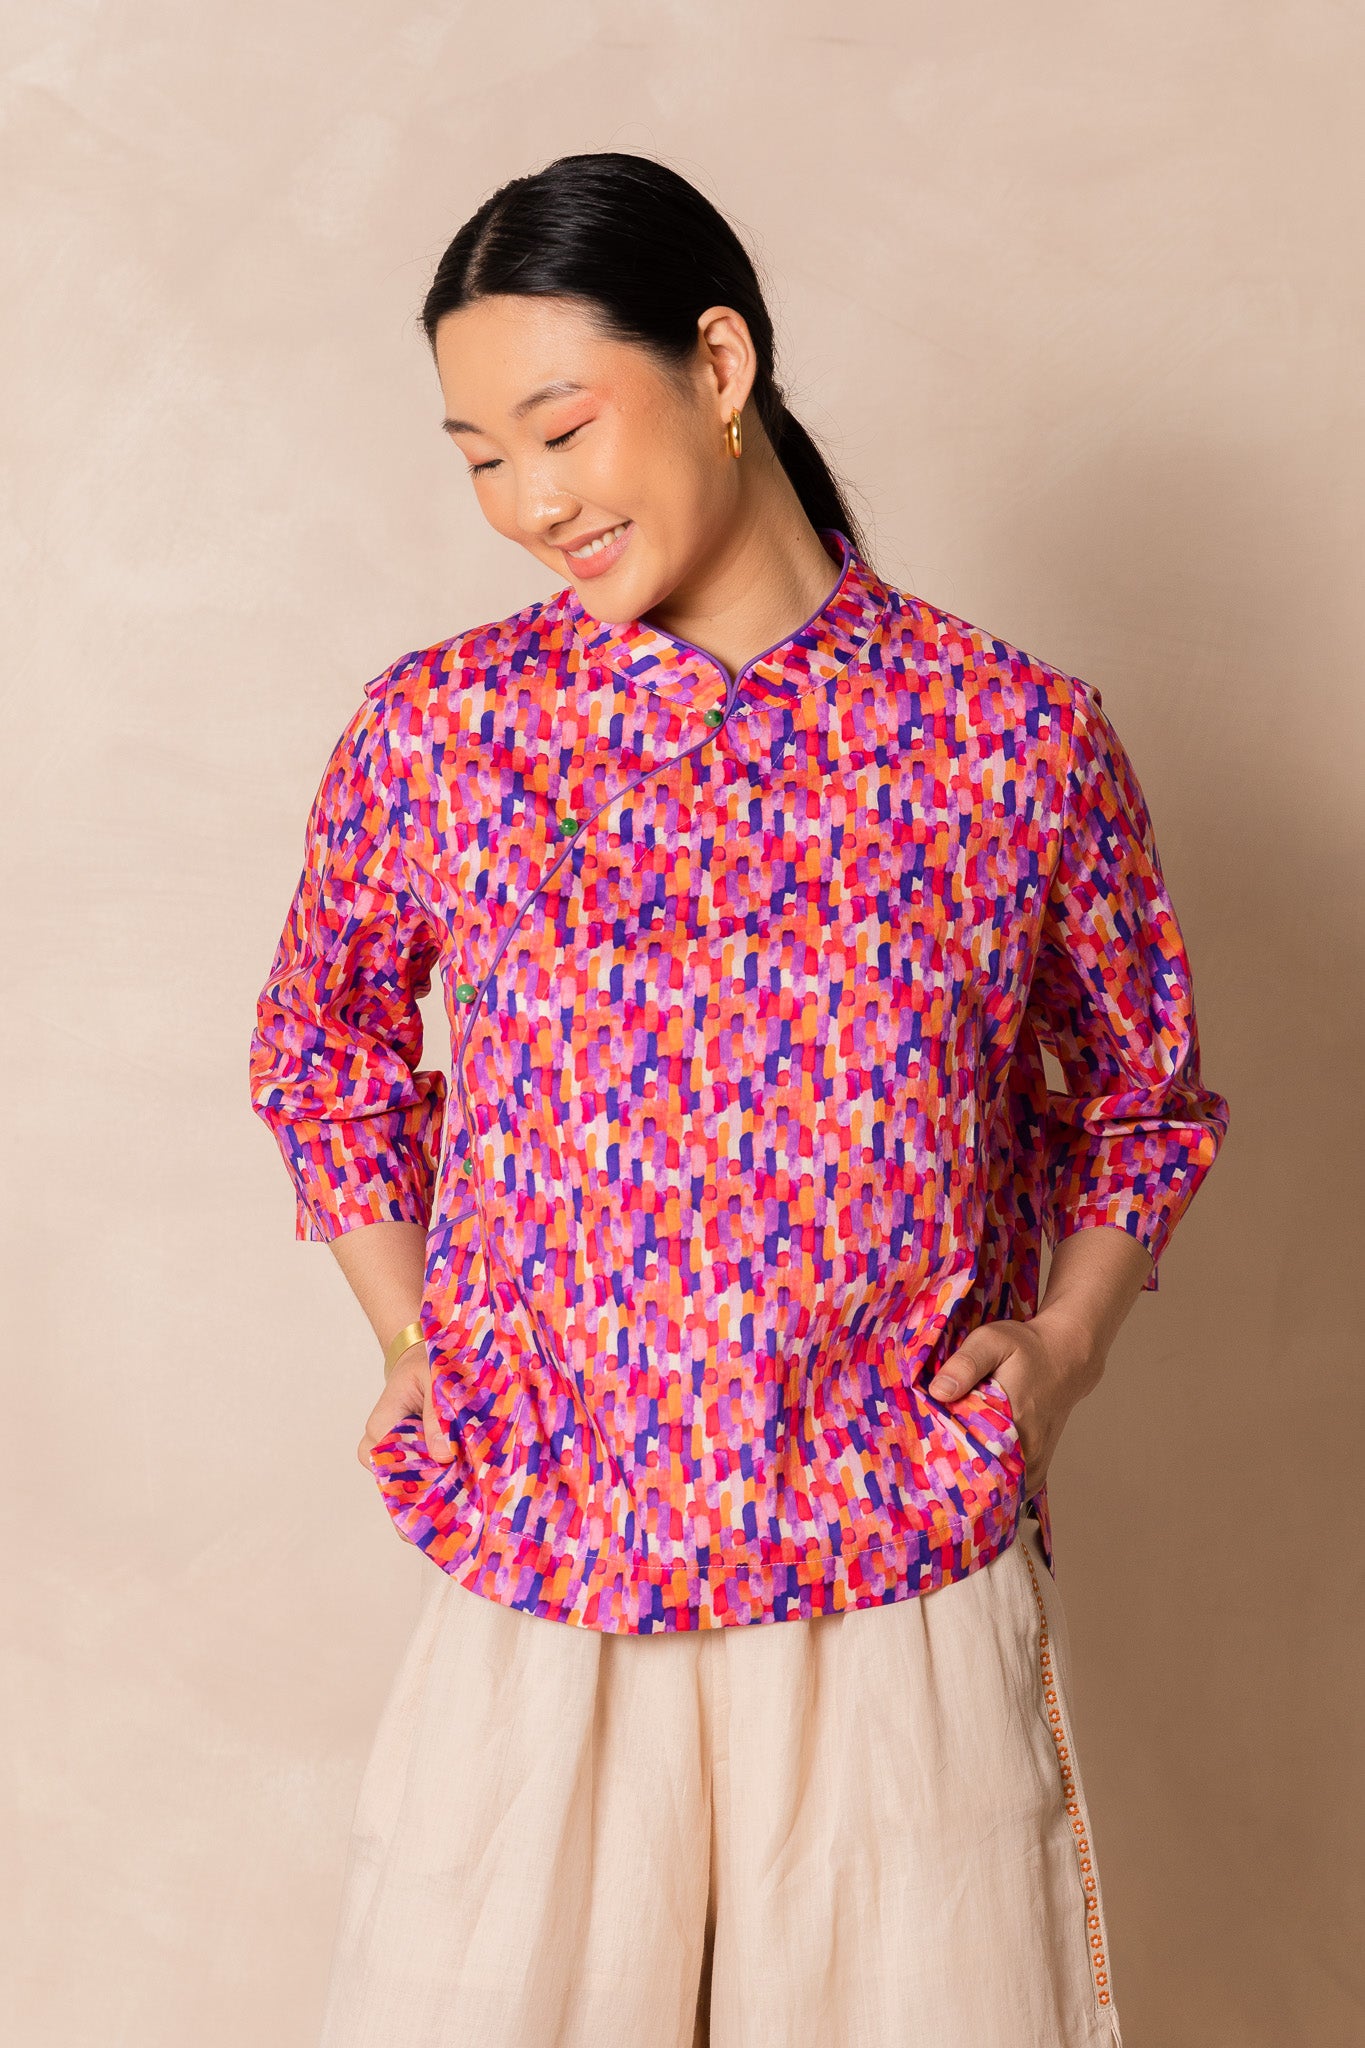 Water Colour Raindrop Print 3/4 Sleeve Cheongsam Top, available on You Living